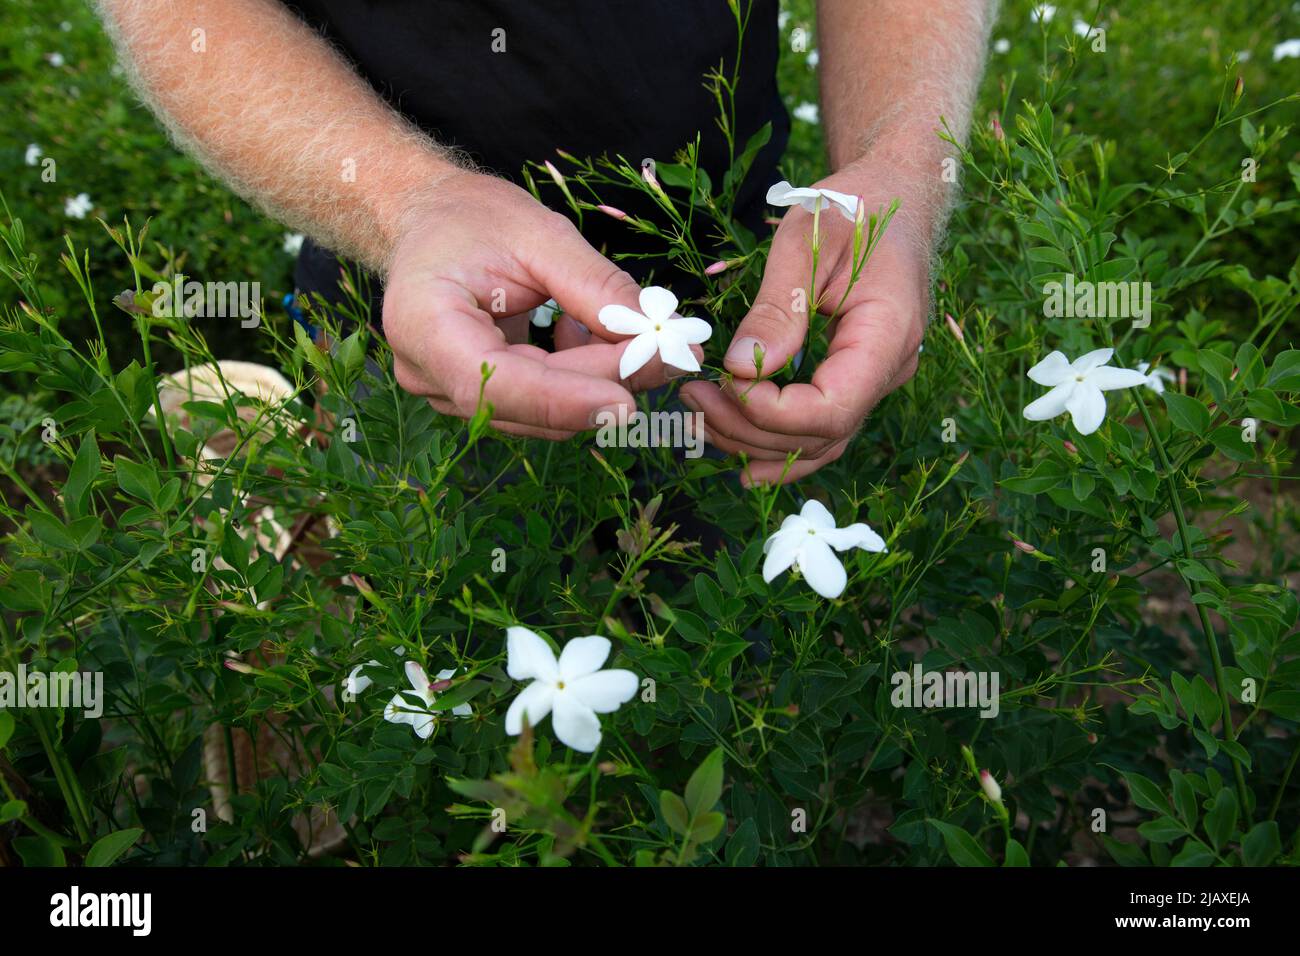 Pierre Chiarla, 29, perfume flower grower hand picking jasmine flowers in his field in Grasse, France on September 10, 2021. It takes between 7,000 and 10,000 jasmine flowers to make up 1 kilogram (2.2 pounds). And it takes about a ton of flowers to extract a kilo of jasmine absolute. Each kilo is worth over 50,000 euros, about $59,000. Chiarla says “jasmine is so delicate that it still must be picked by hand.” He says climate change is a concern. 'We are worried because we are seeing, for example, freezing temperatures and hail in the spring much more frequently,' says Chiarla. Grasse has had Stock Photo